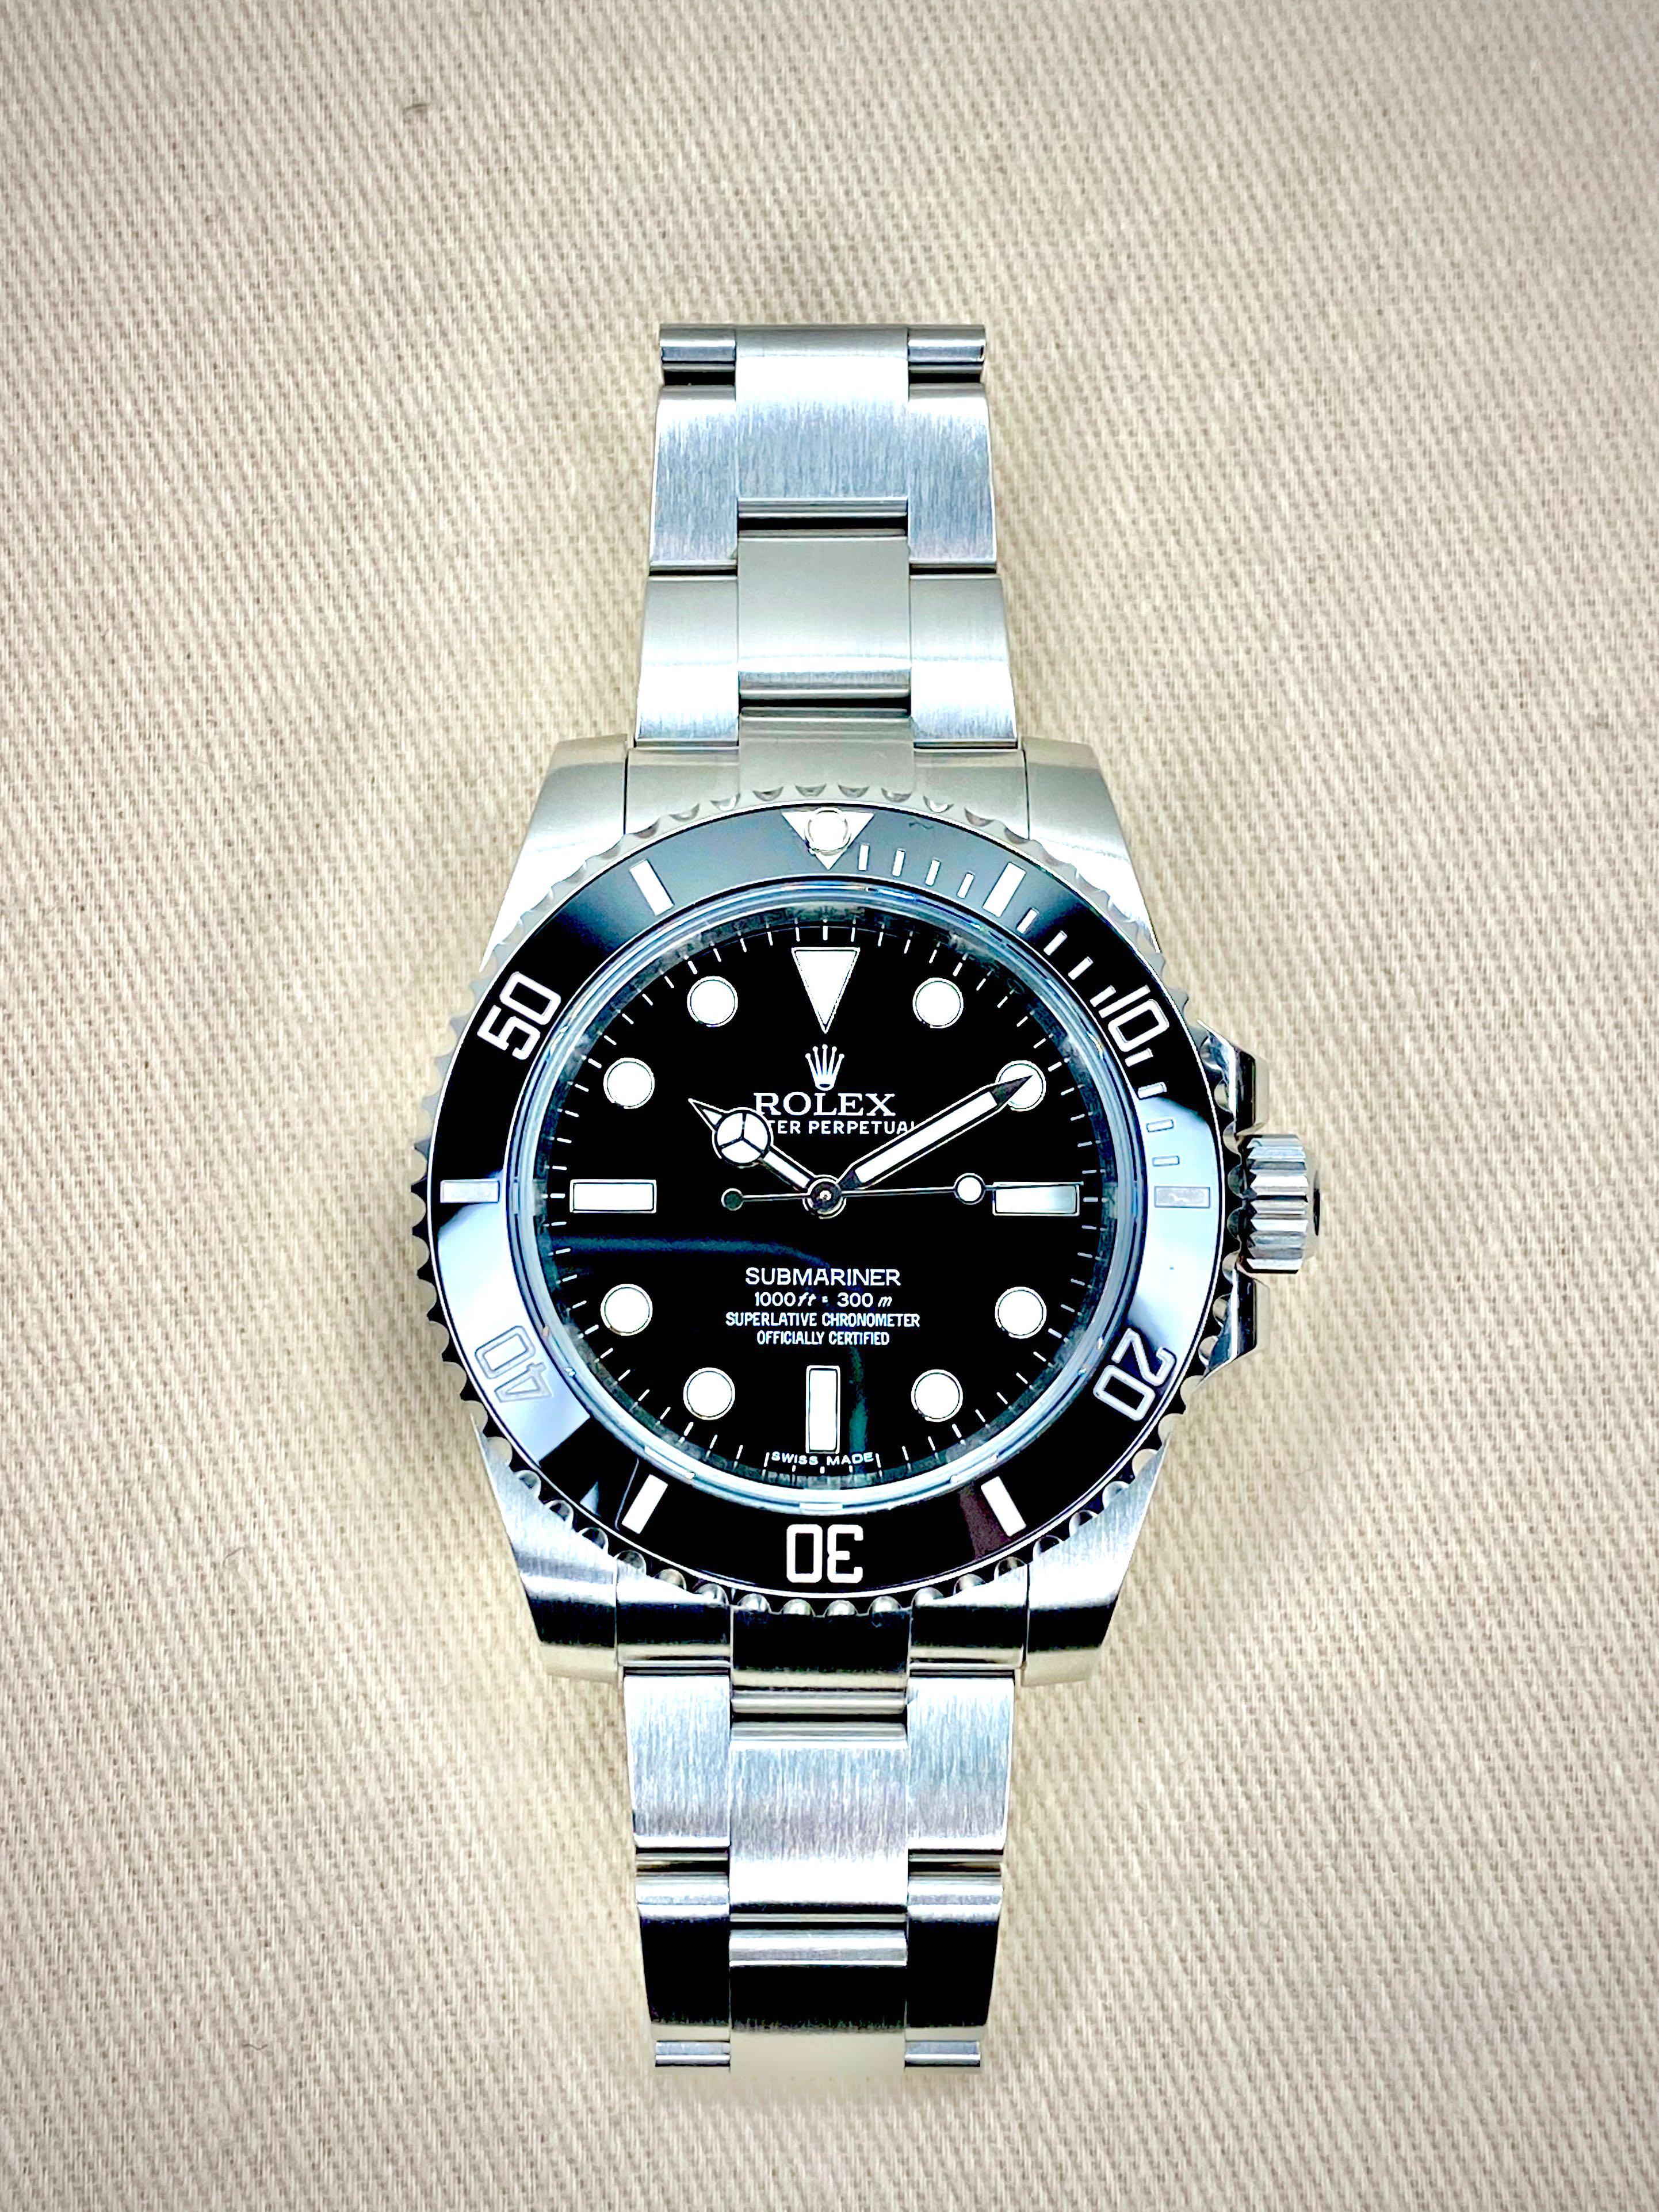 submariner no date discontinued